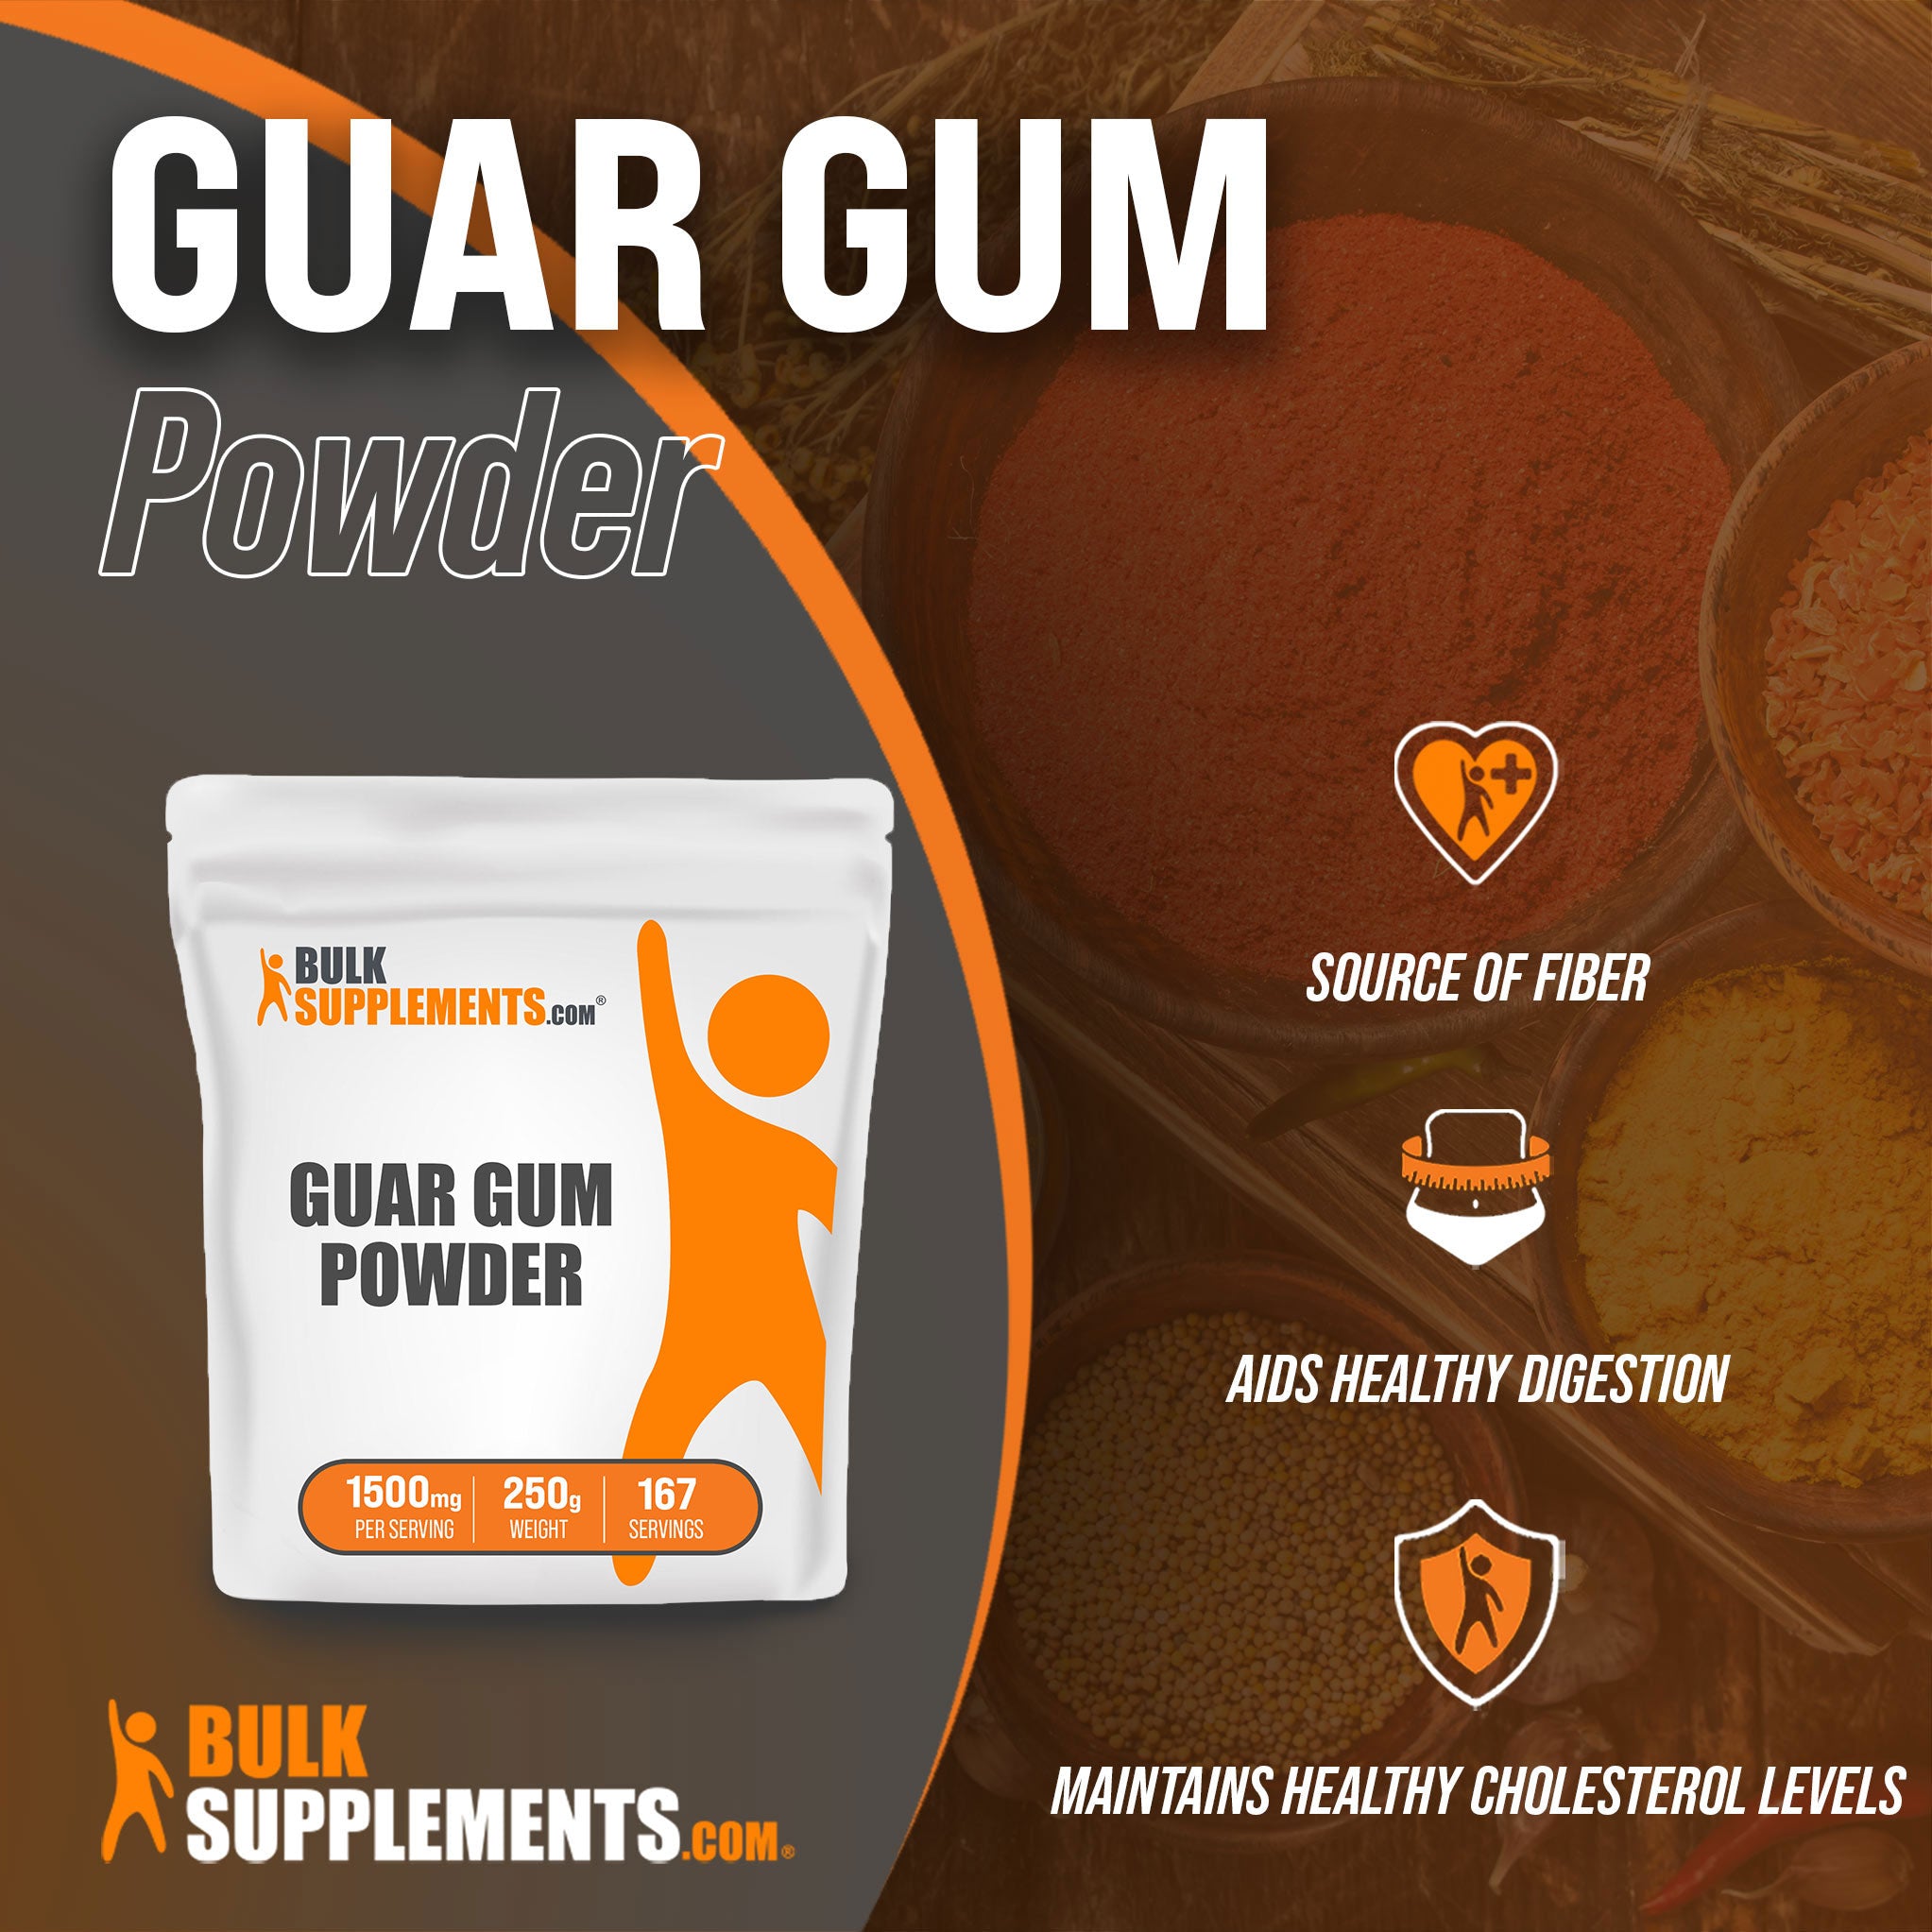 Benefits of Guar Gum Powder; source of fiber, aids healthy digestion, maintains healthy cholesterol levels